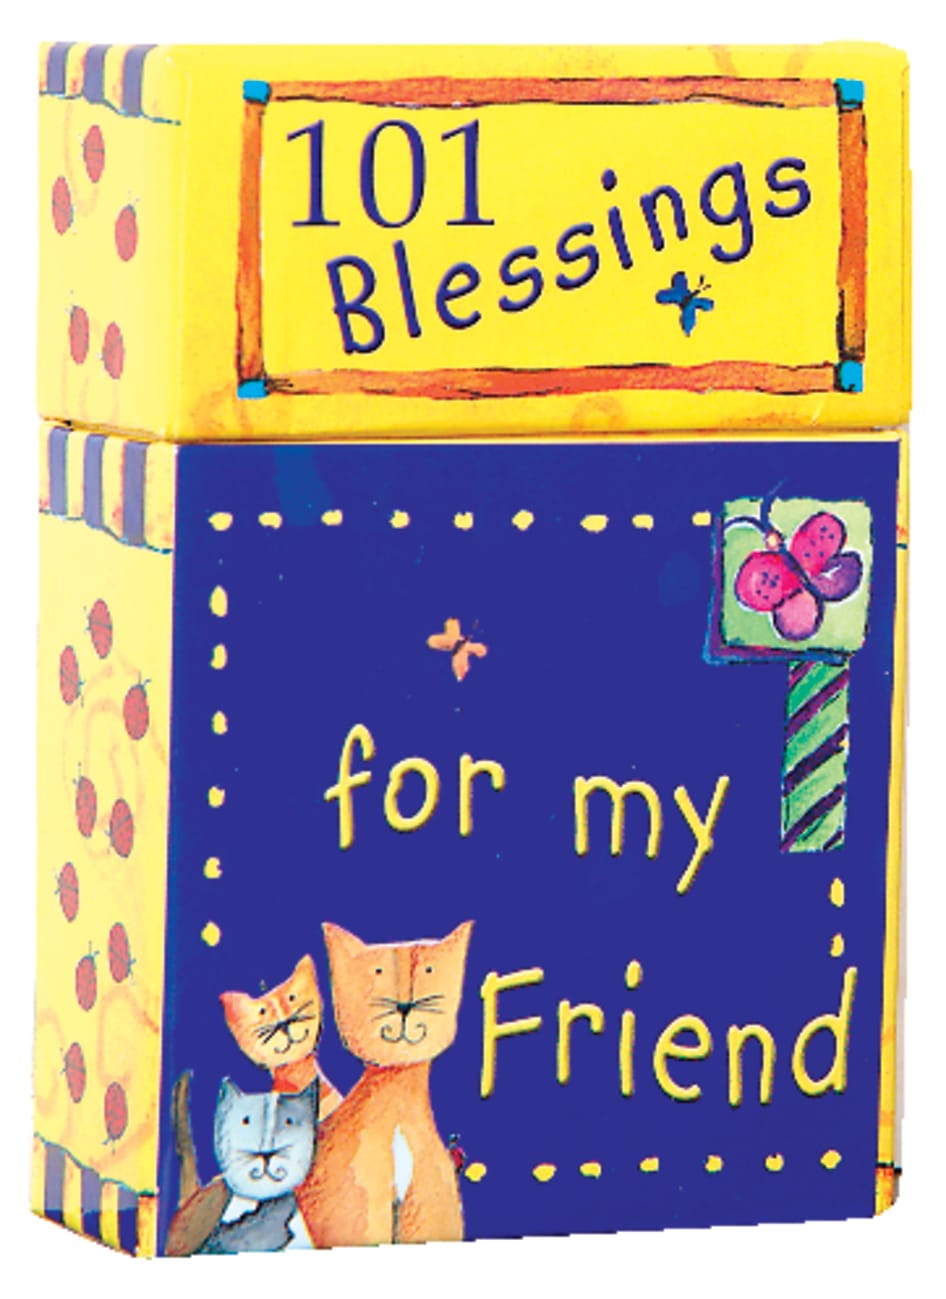 Box of Blessings: 101 Blessings For My Friend Box